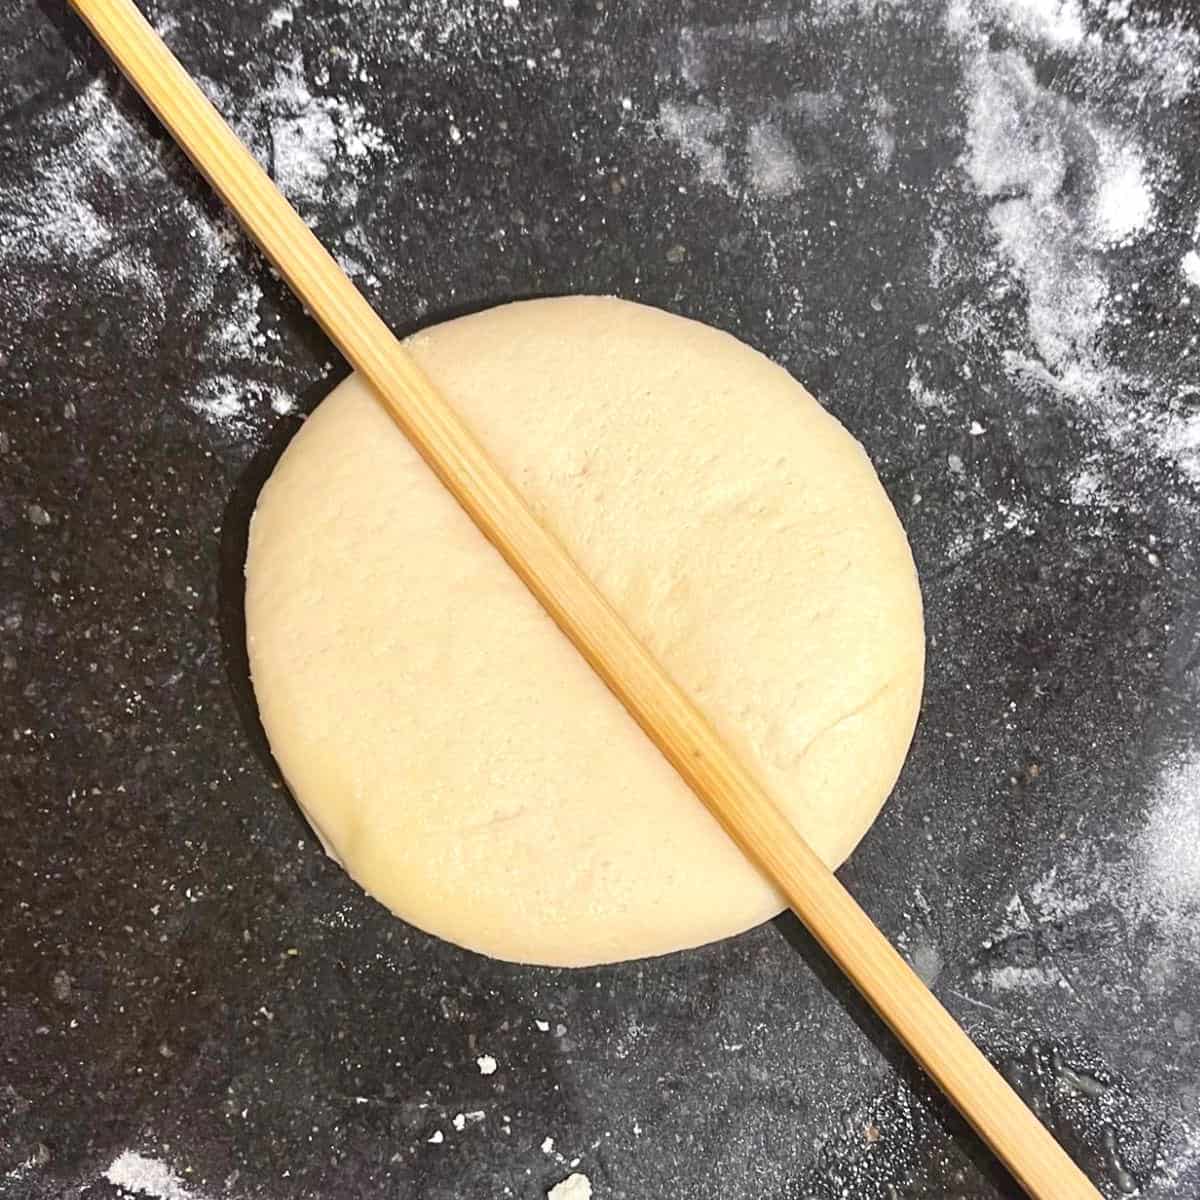 Chopstick pressed into each dough round to create an indentation in center.